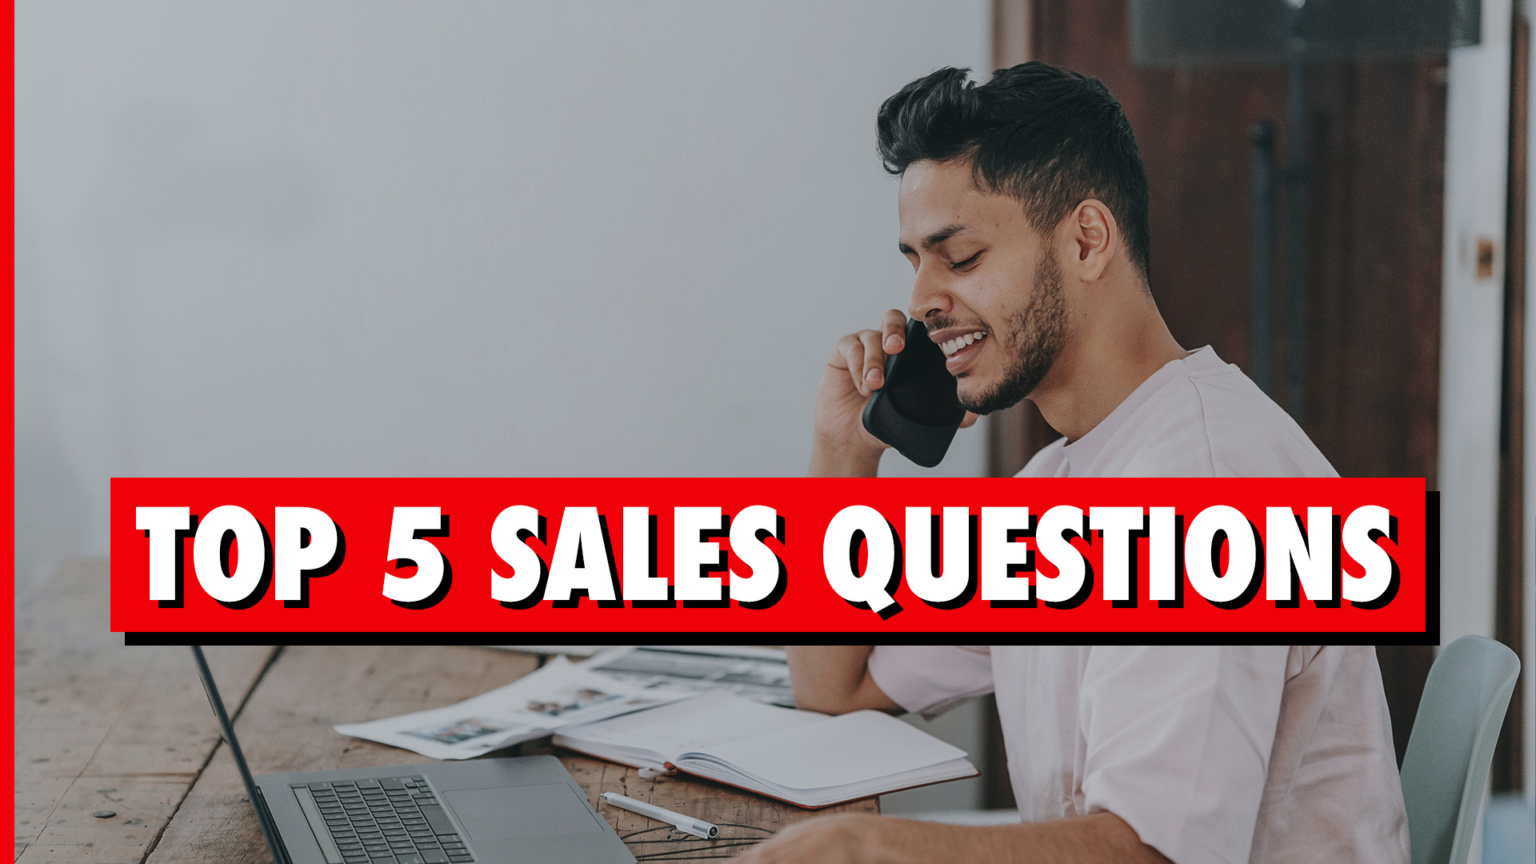 Trevor Ambrose Public Speaking Sales Training The Top 5 Sales Questions